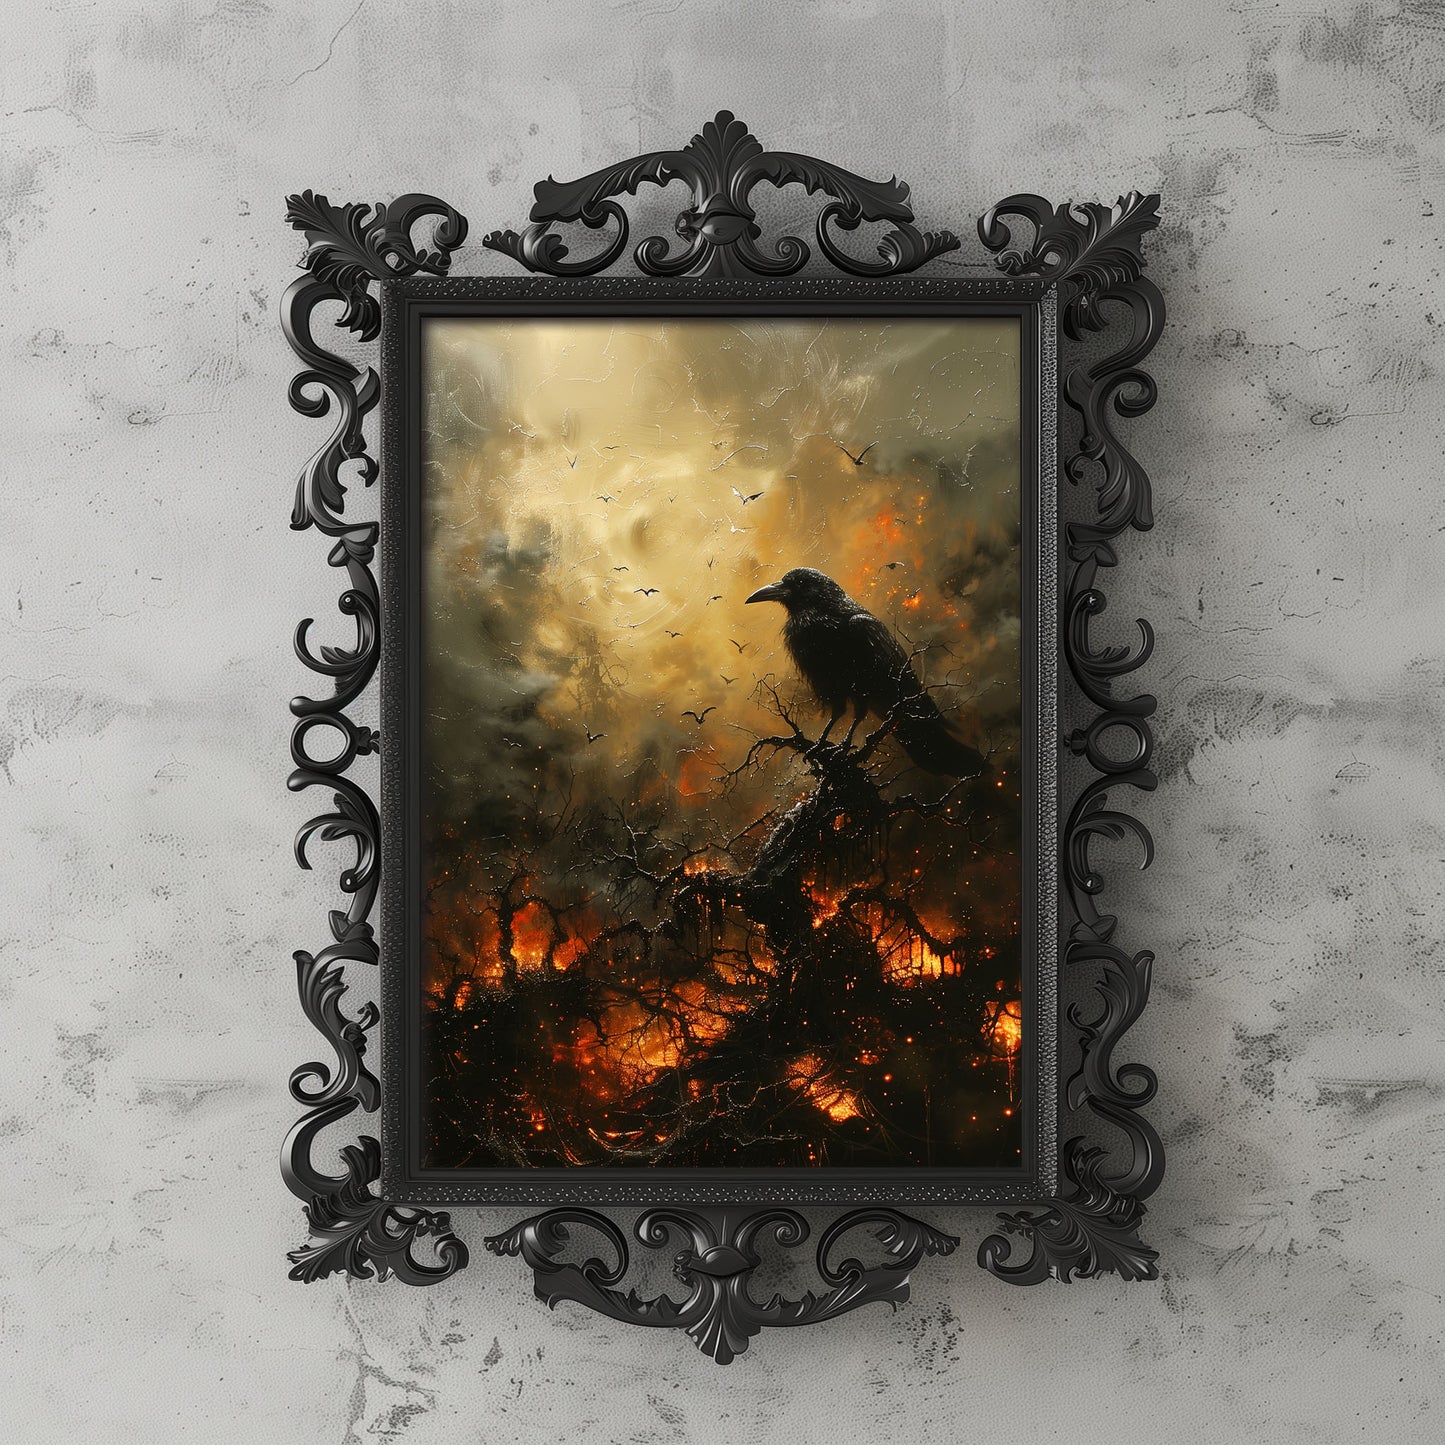 Black Crow in Burning Forest Poster - Creepy Wall Art